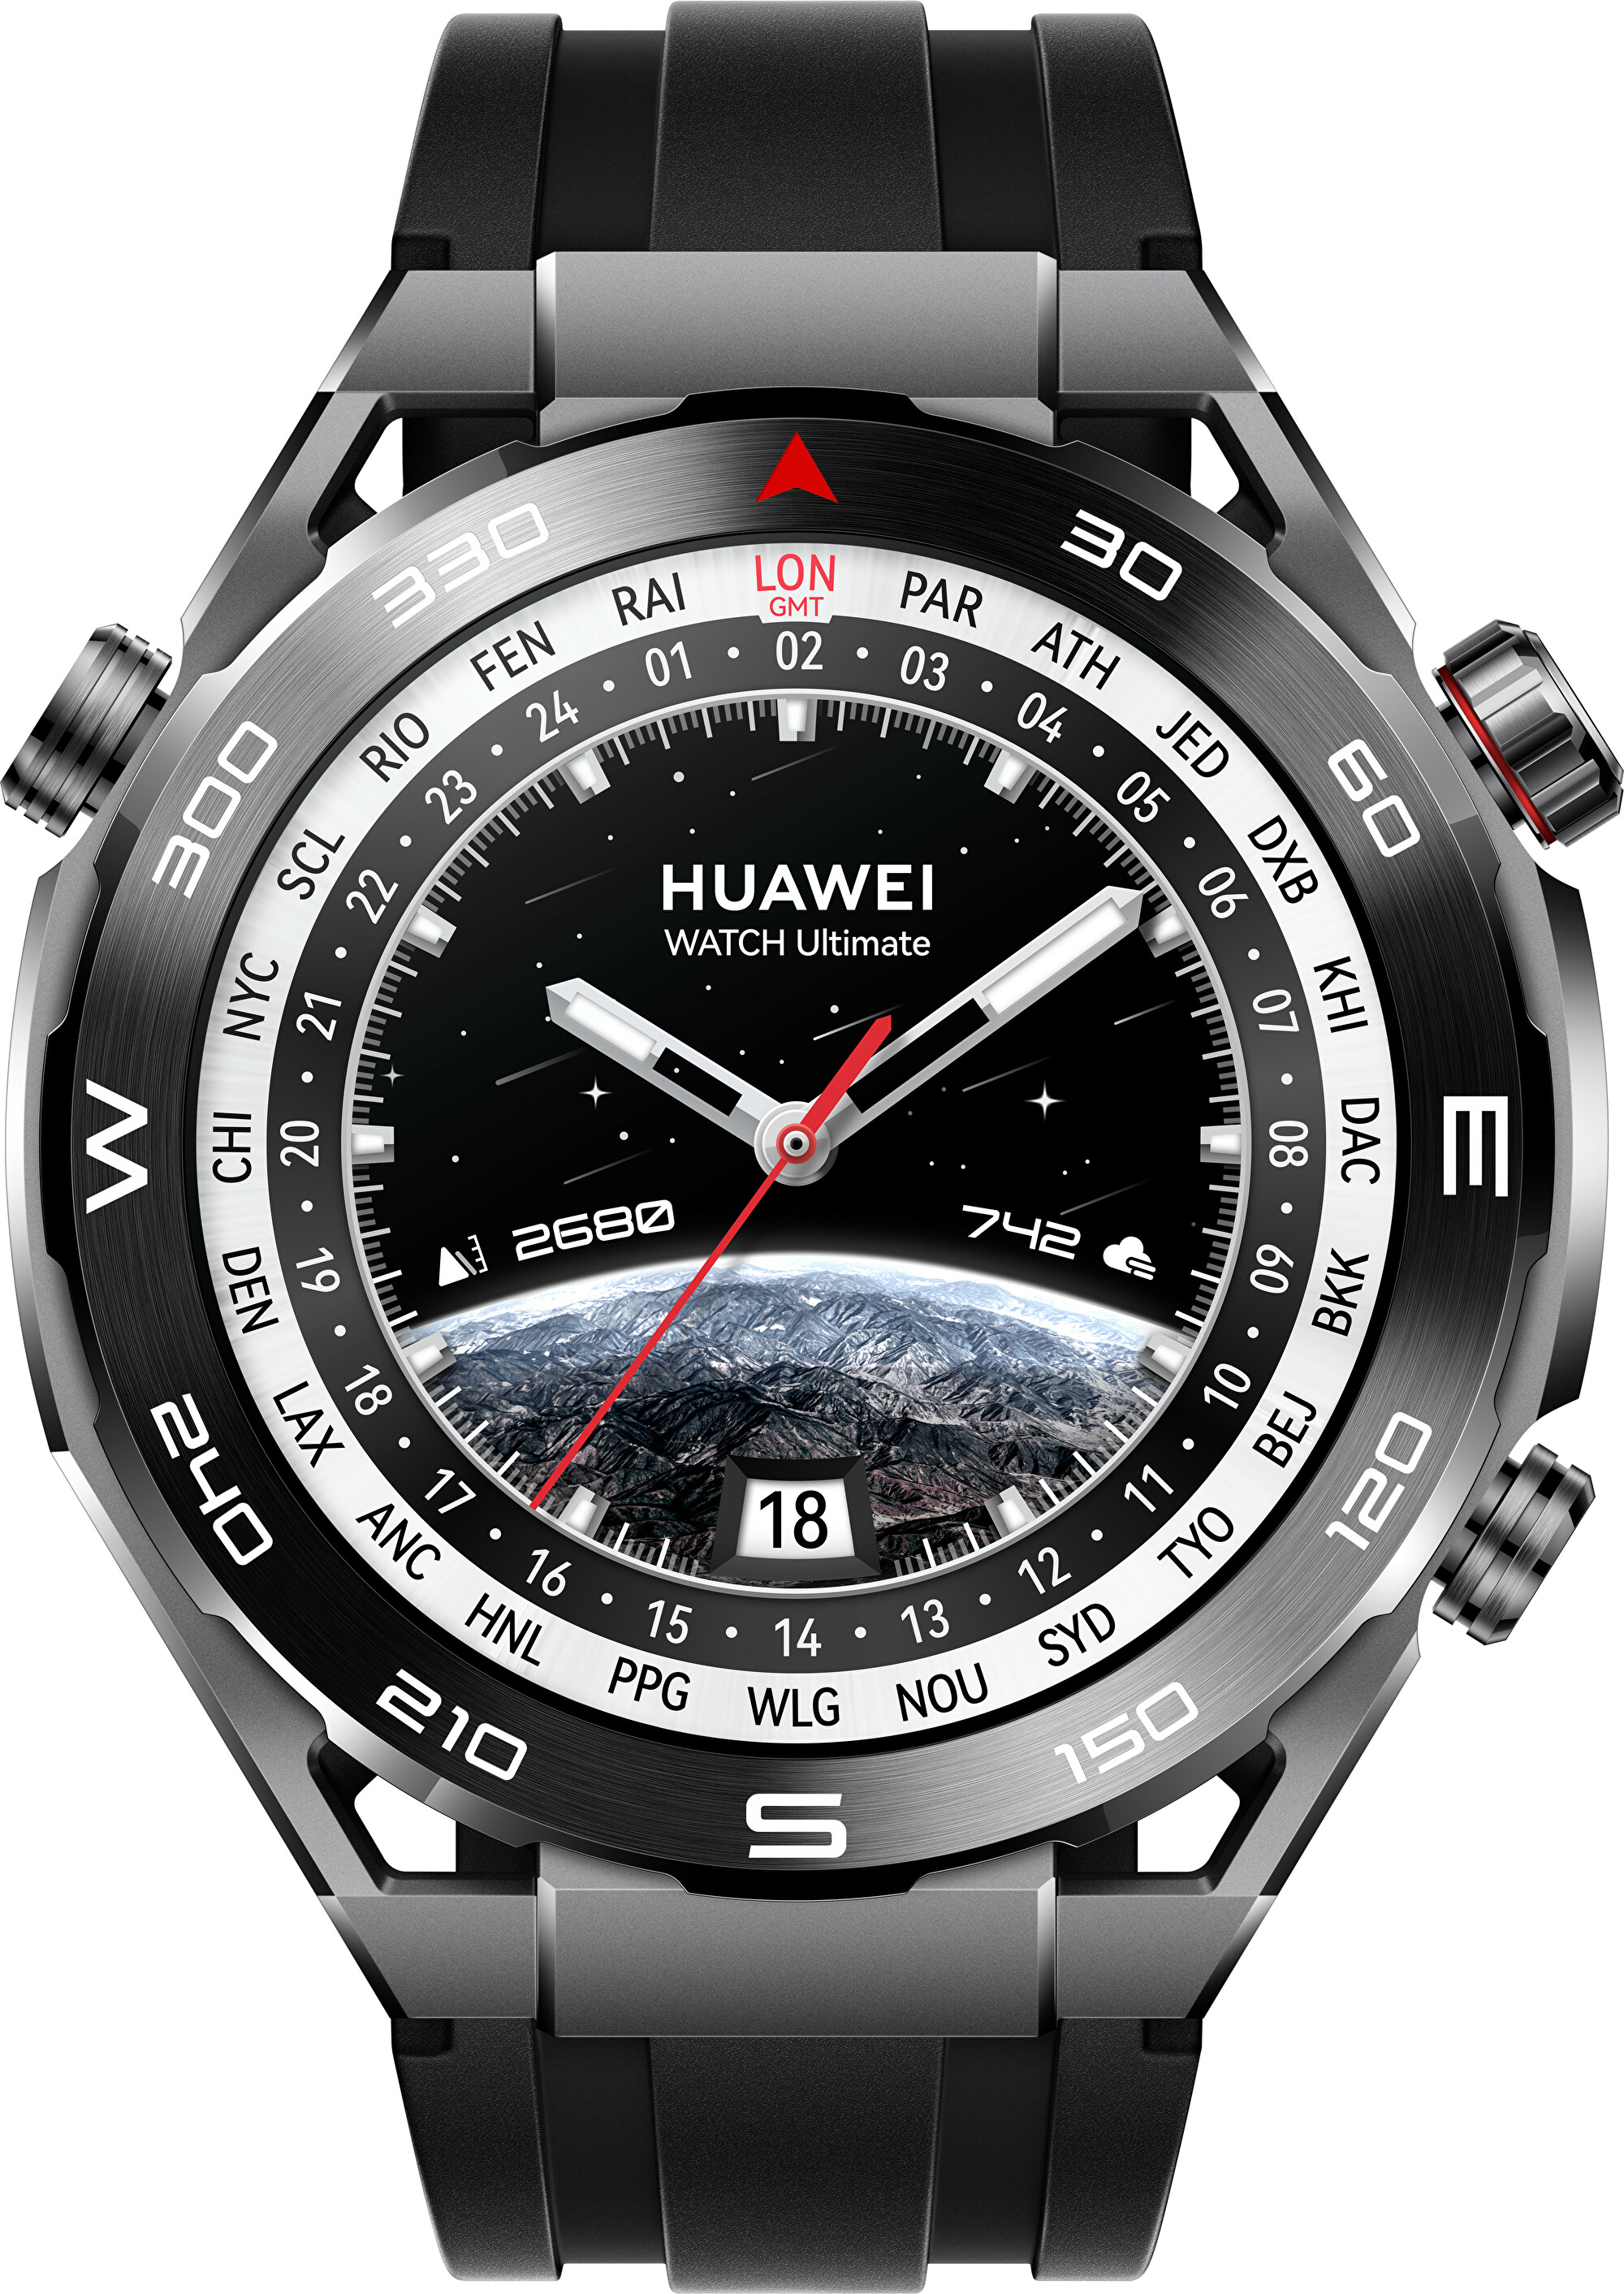 Huawei -  WATCH Ultimate Expedition Black